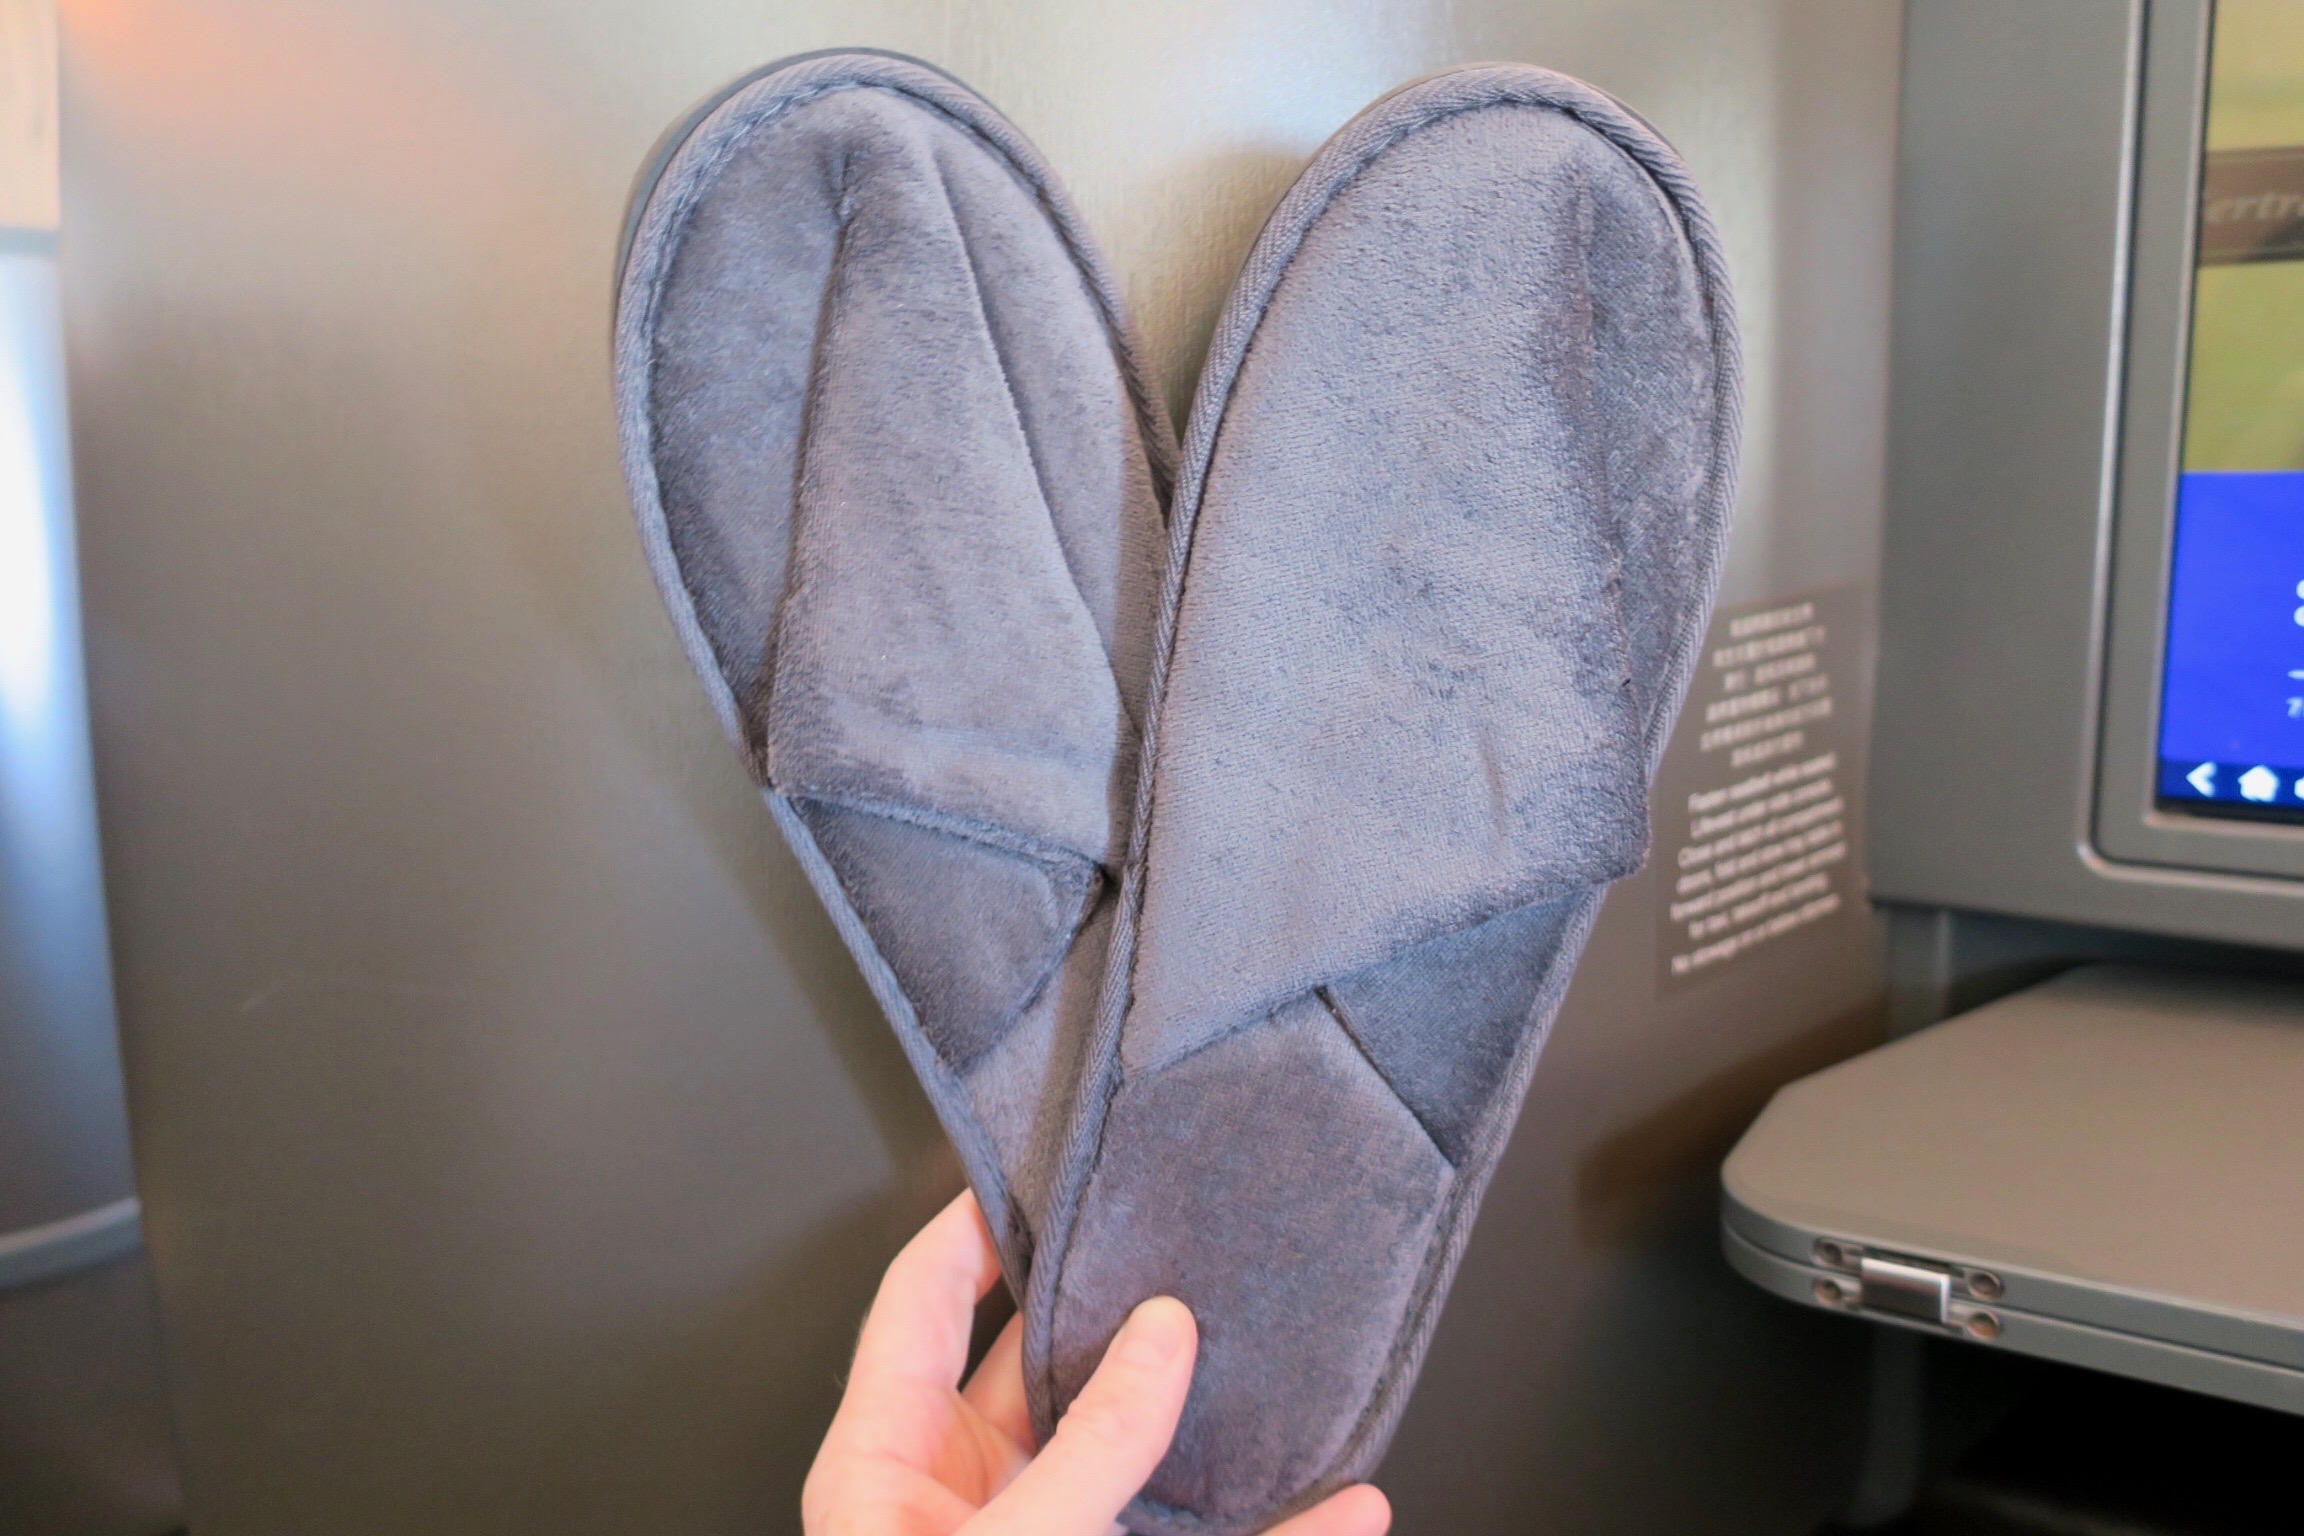 China Airlines Business Class slippers